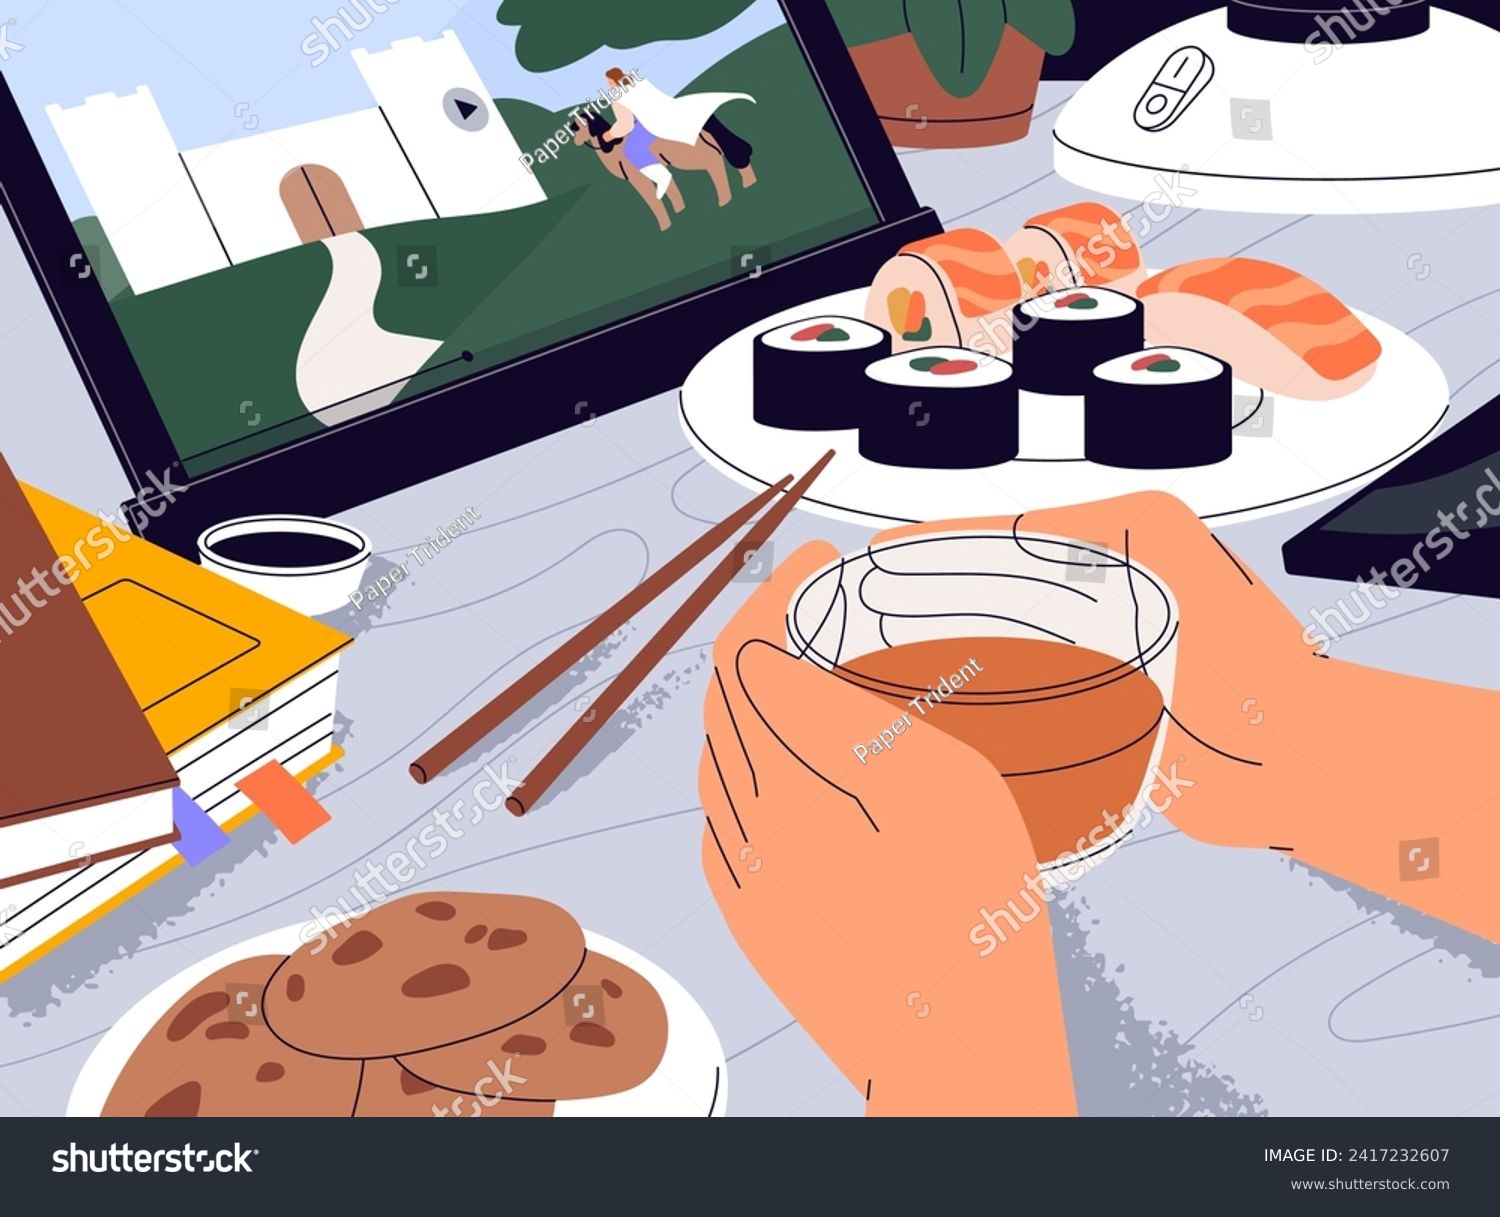 SVG of People watch videos, movie by tablet. Character holds cup in hands, drinks tea. Person eating sushi, fish rolls on the table. Lunch break during work. Cozy student workplace. Flat vector illustration svg